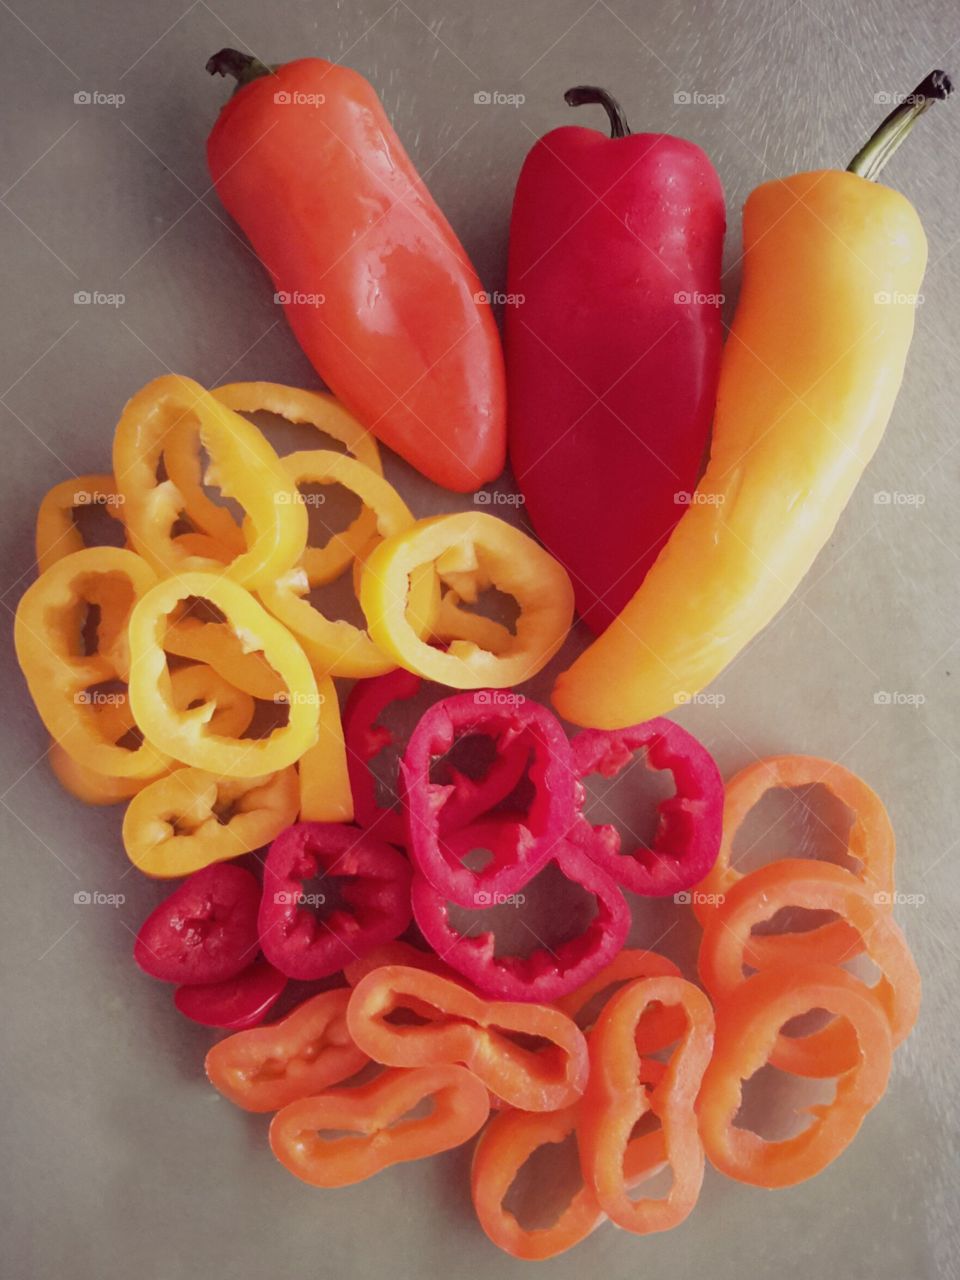 Colorful sliced and whole sweet peppers